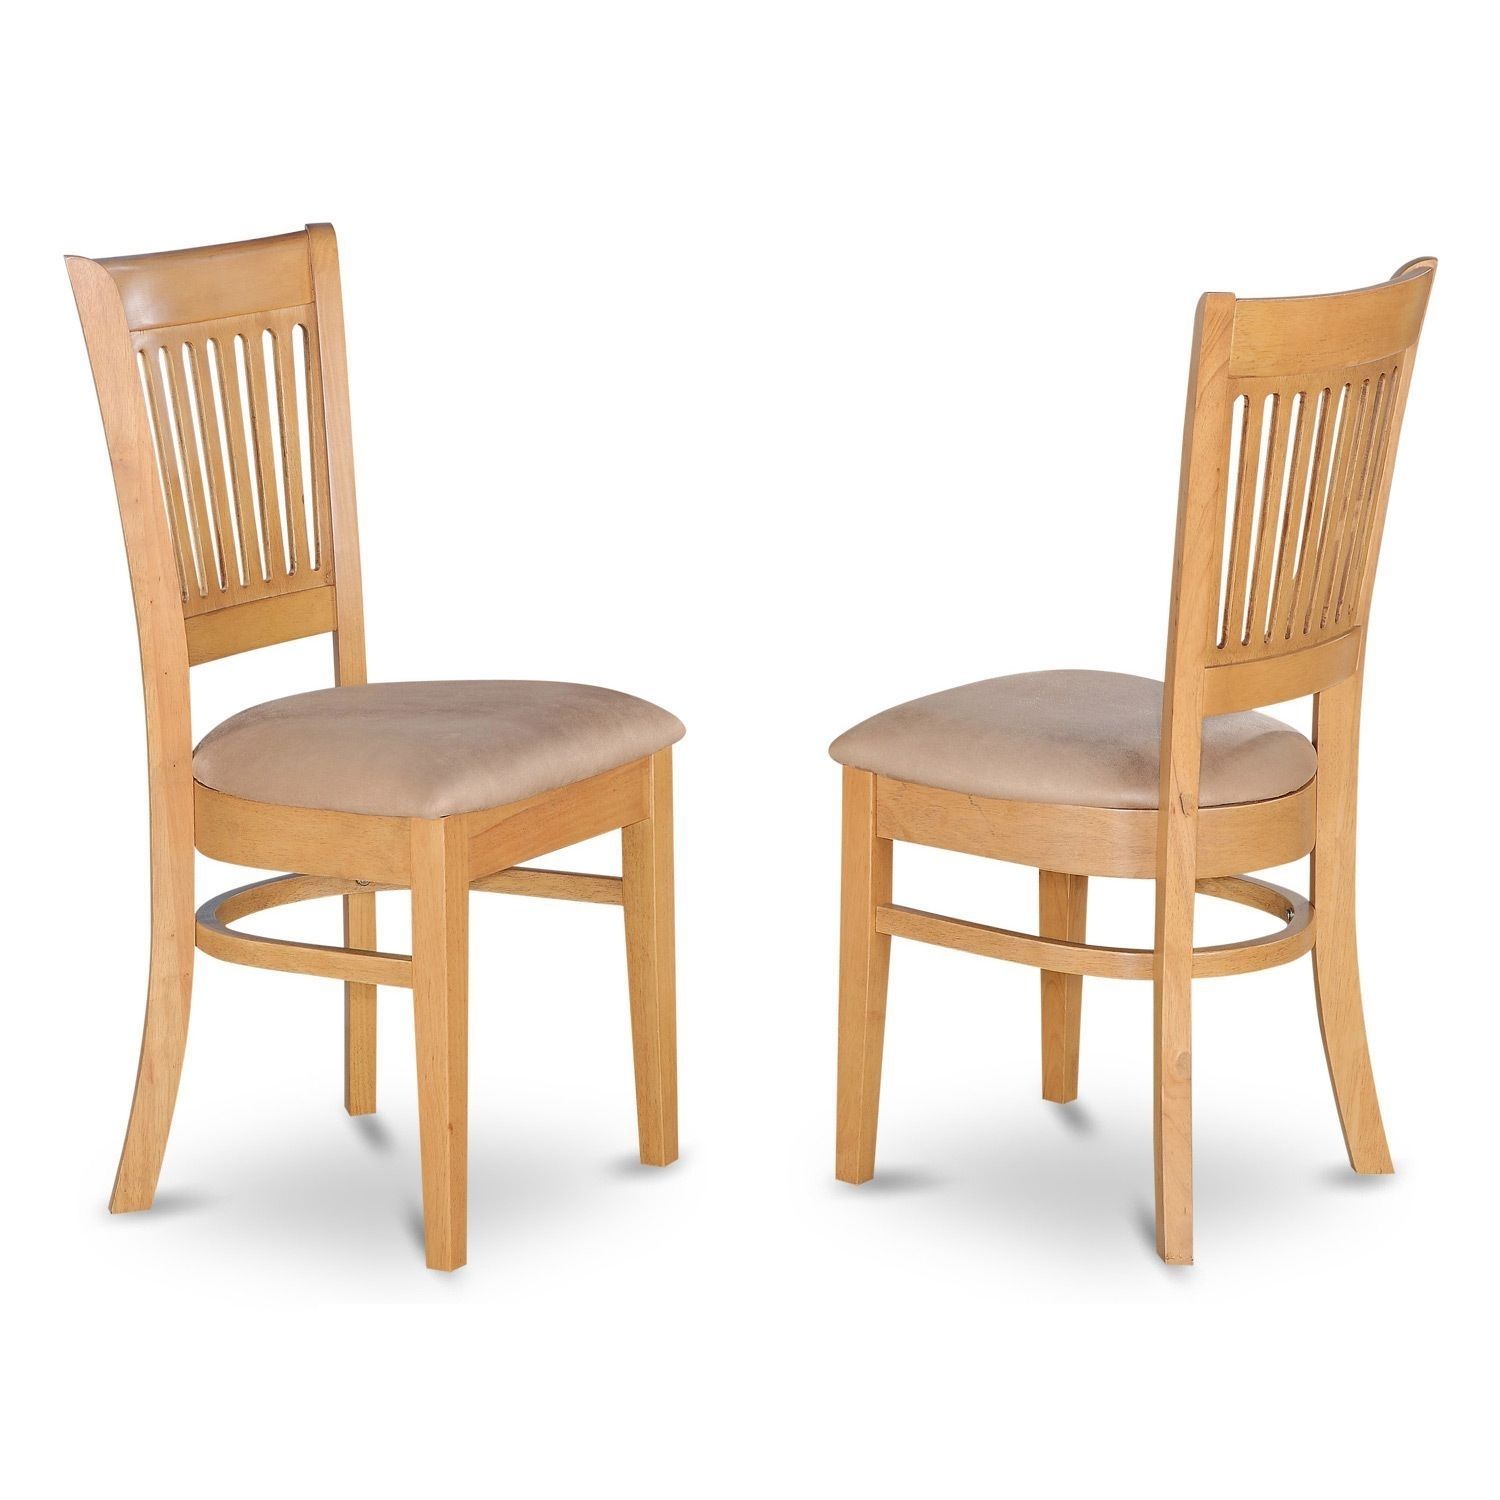 Vancouver Oak Dining Chairs (Set Of 2) (Microfiber), Brown Pertaining To Recent Caden 6 Piece Dining Sets With Upholstered Side Chair (View 19 of 20)